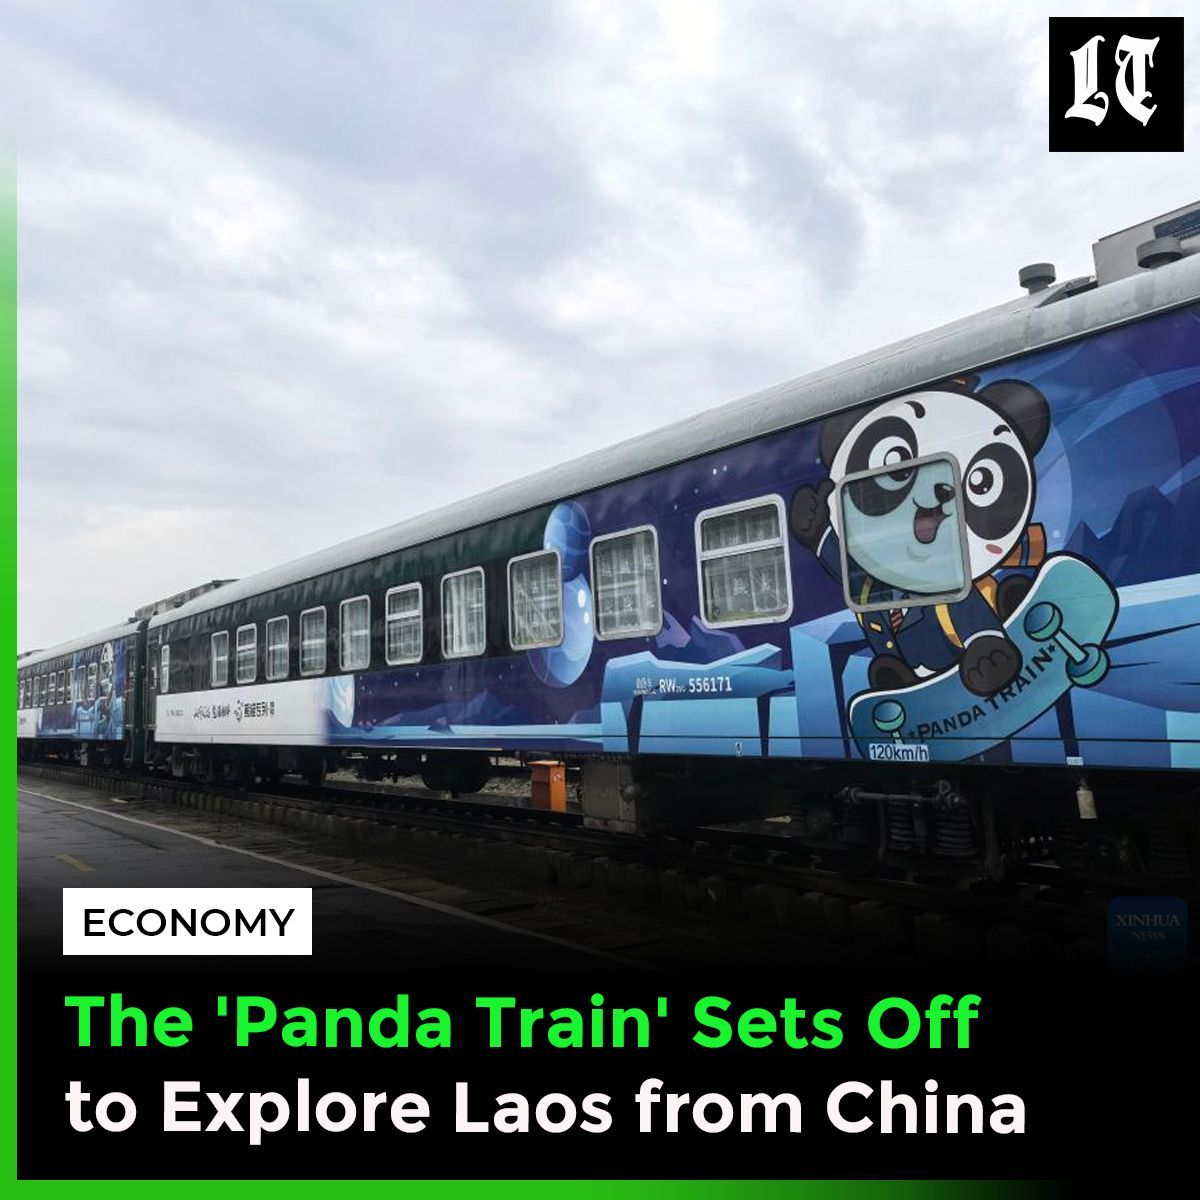 The Laos-China tourist train departed from Guiyang, China, today, 8 May, linking Guiyang, Xishuangbanna, and Laos for an eight-day tour across Laos. Adorned with images, paintings, and mascots of the panda, the train is aptly named the 'Panda Train.